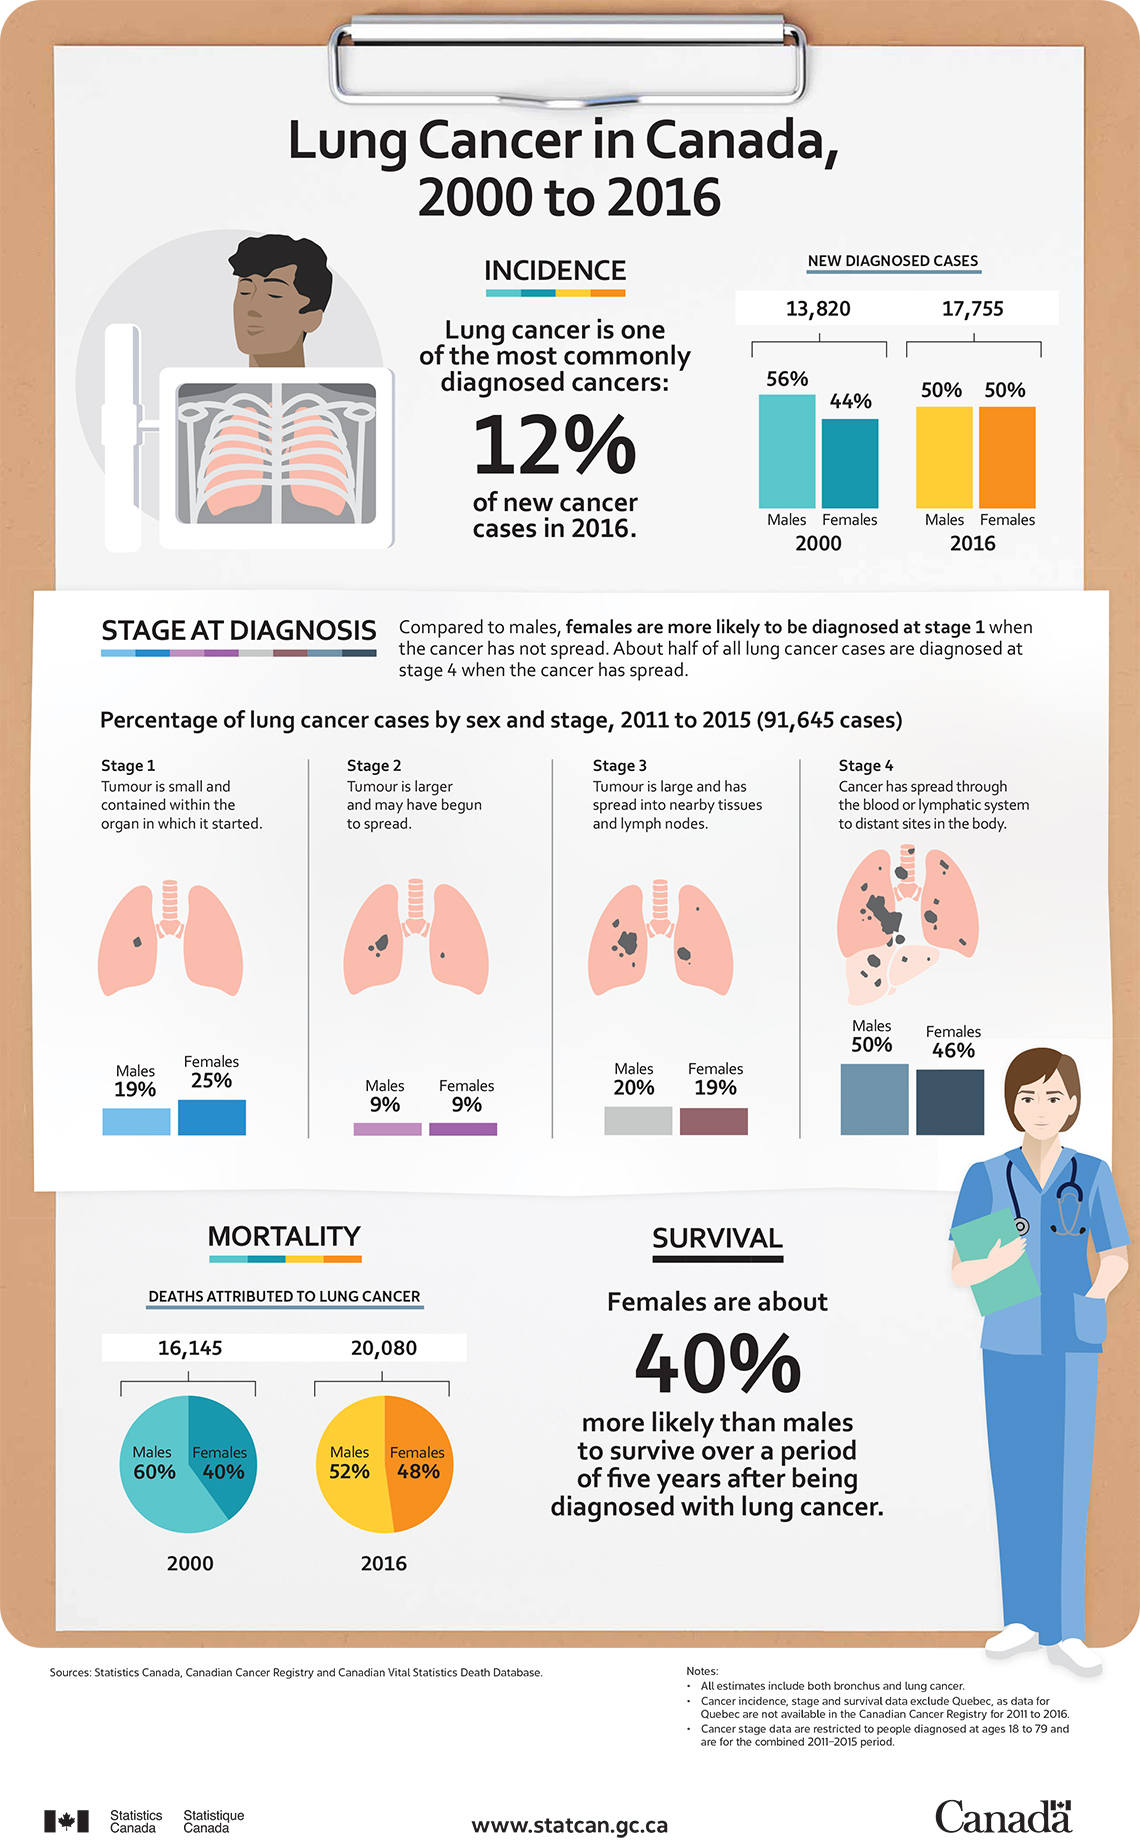 Lung Cancer in Canada, 2000 to 2016